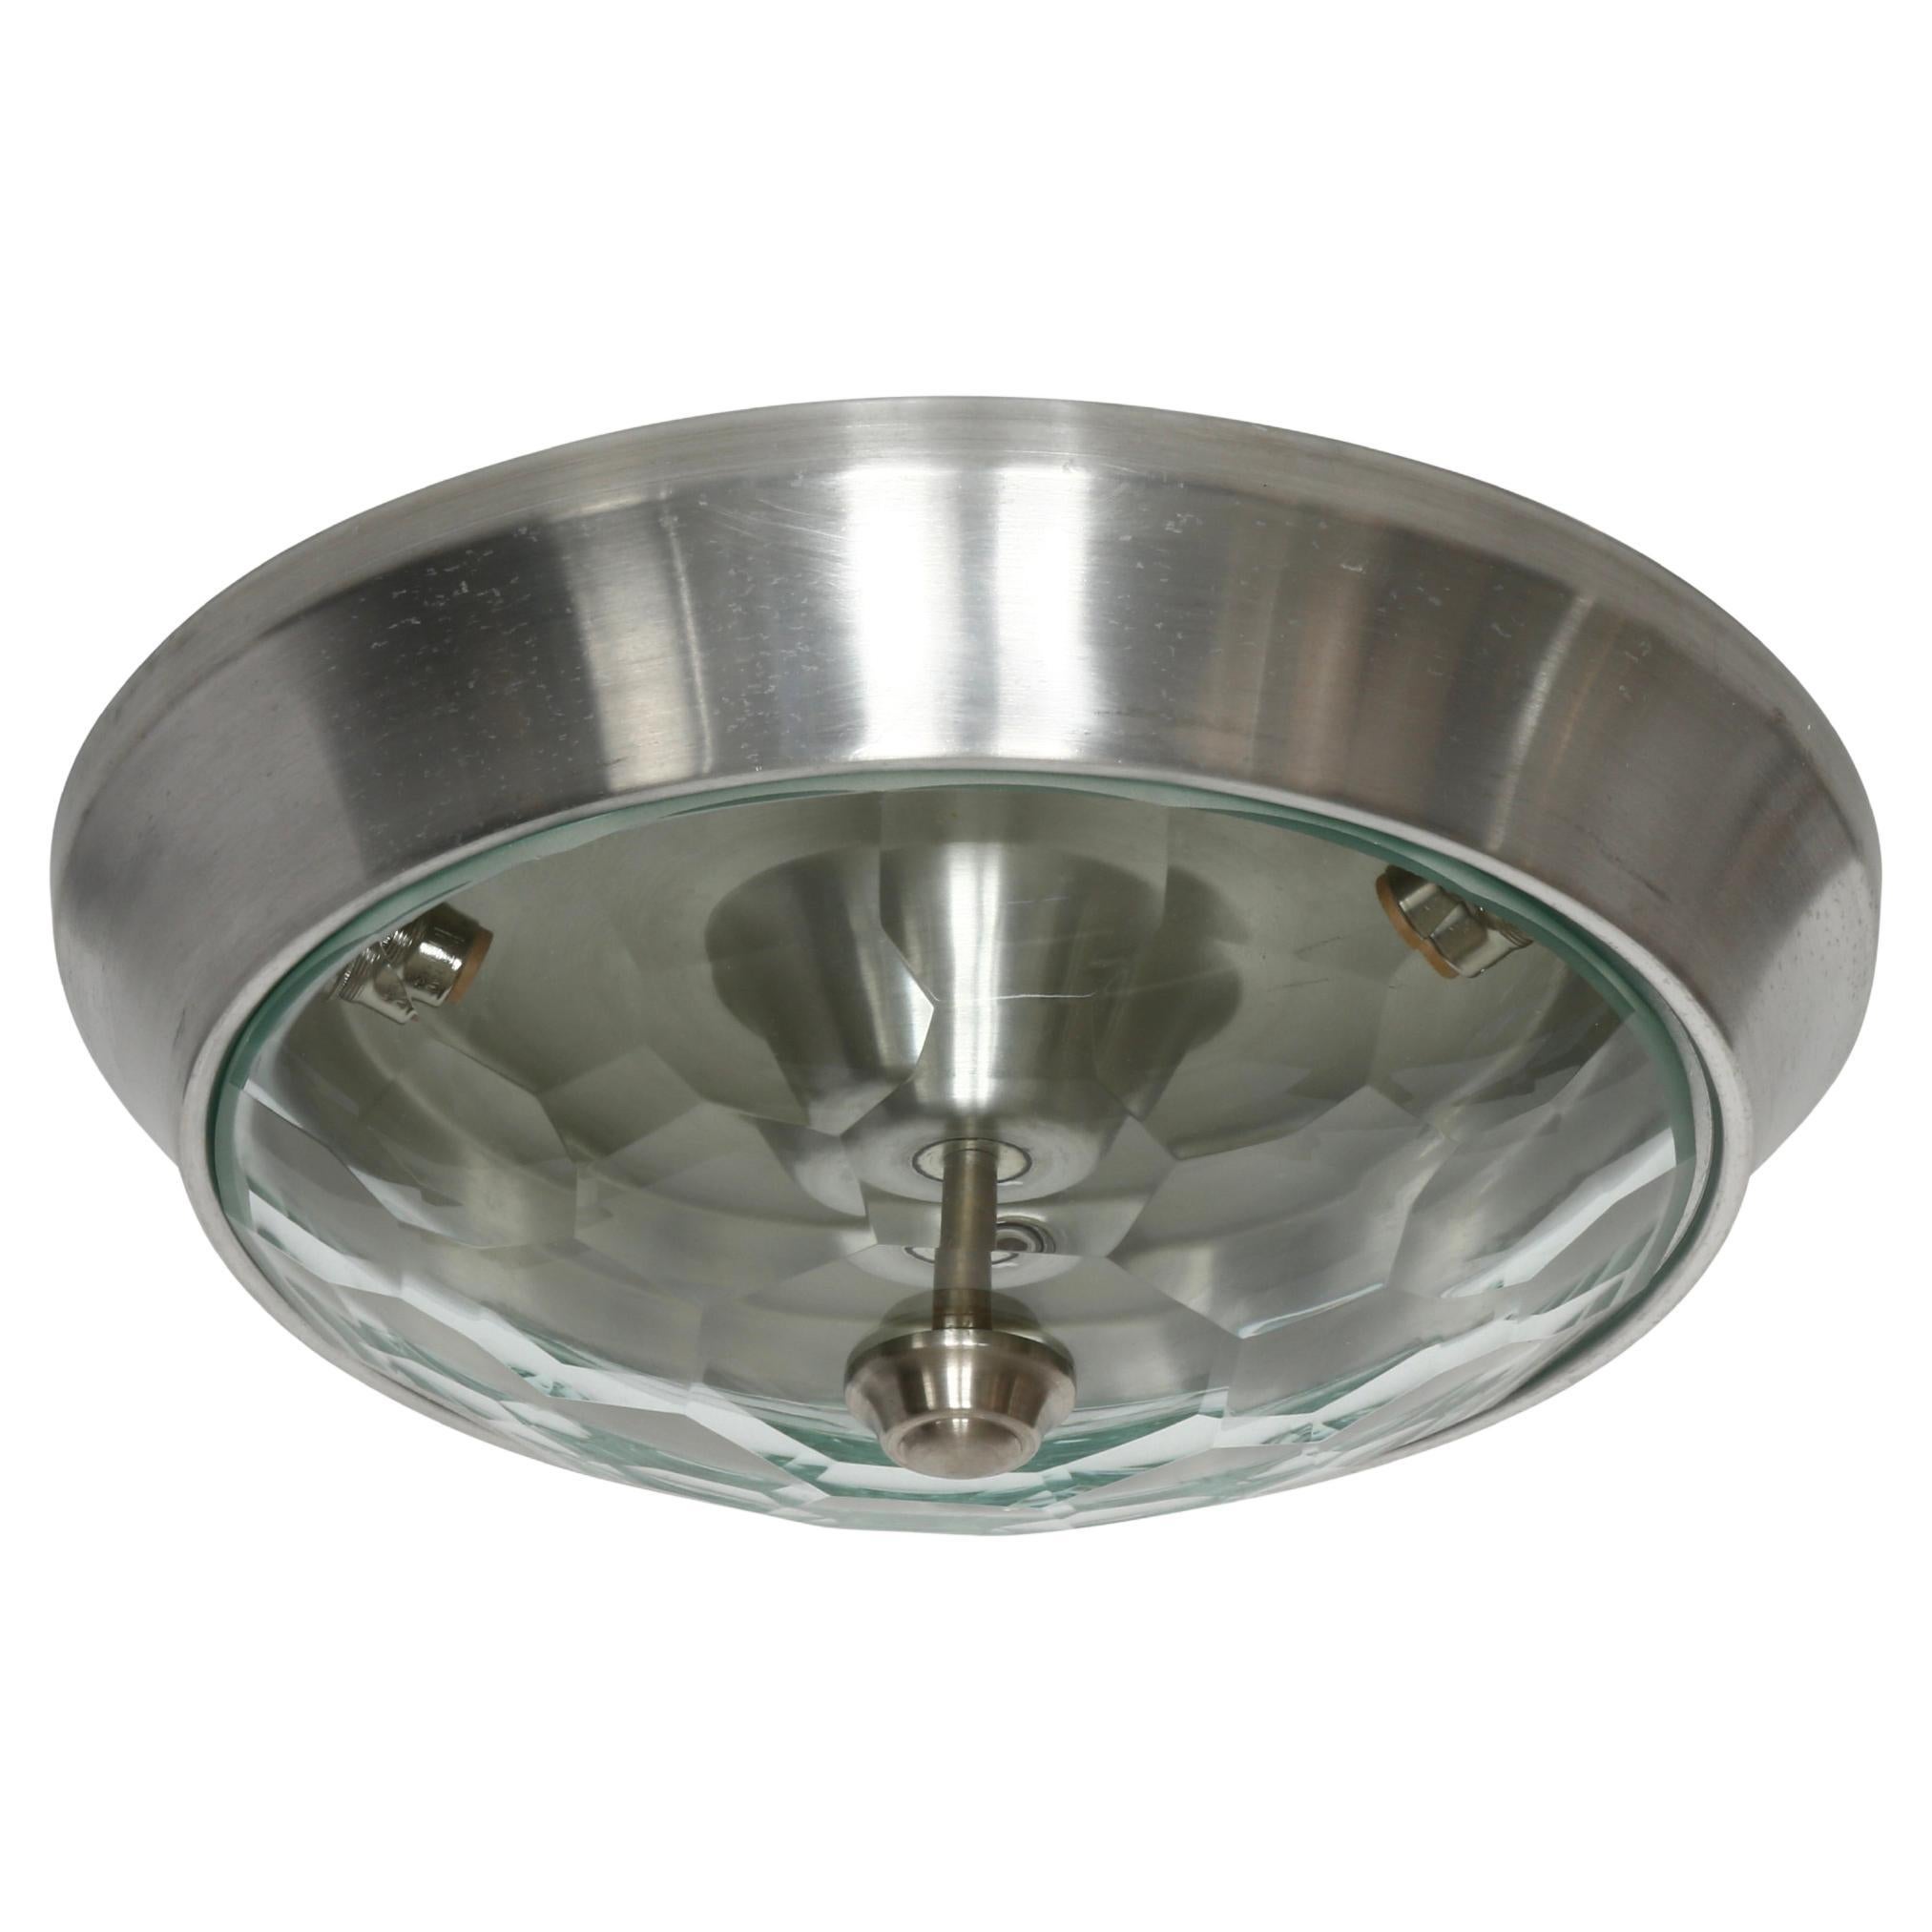 Pia Guidetti Crippa for Lumi flush mount ceiling light
Made in Italy, 1960s
Faceted glass shades, aluminum frames.
Takes 3 candelabra sockets. 
Complimentary US rewiring upon request.
Price is for one light.

We take pride in bringing vintage